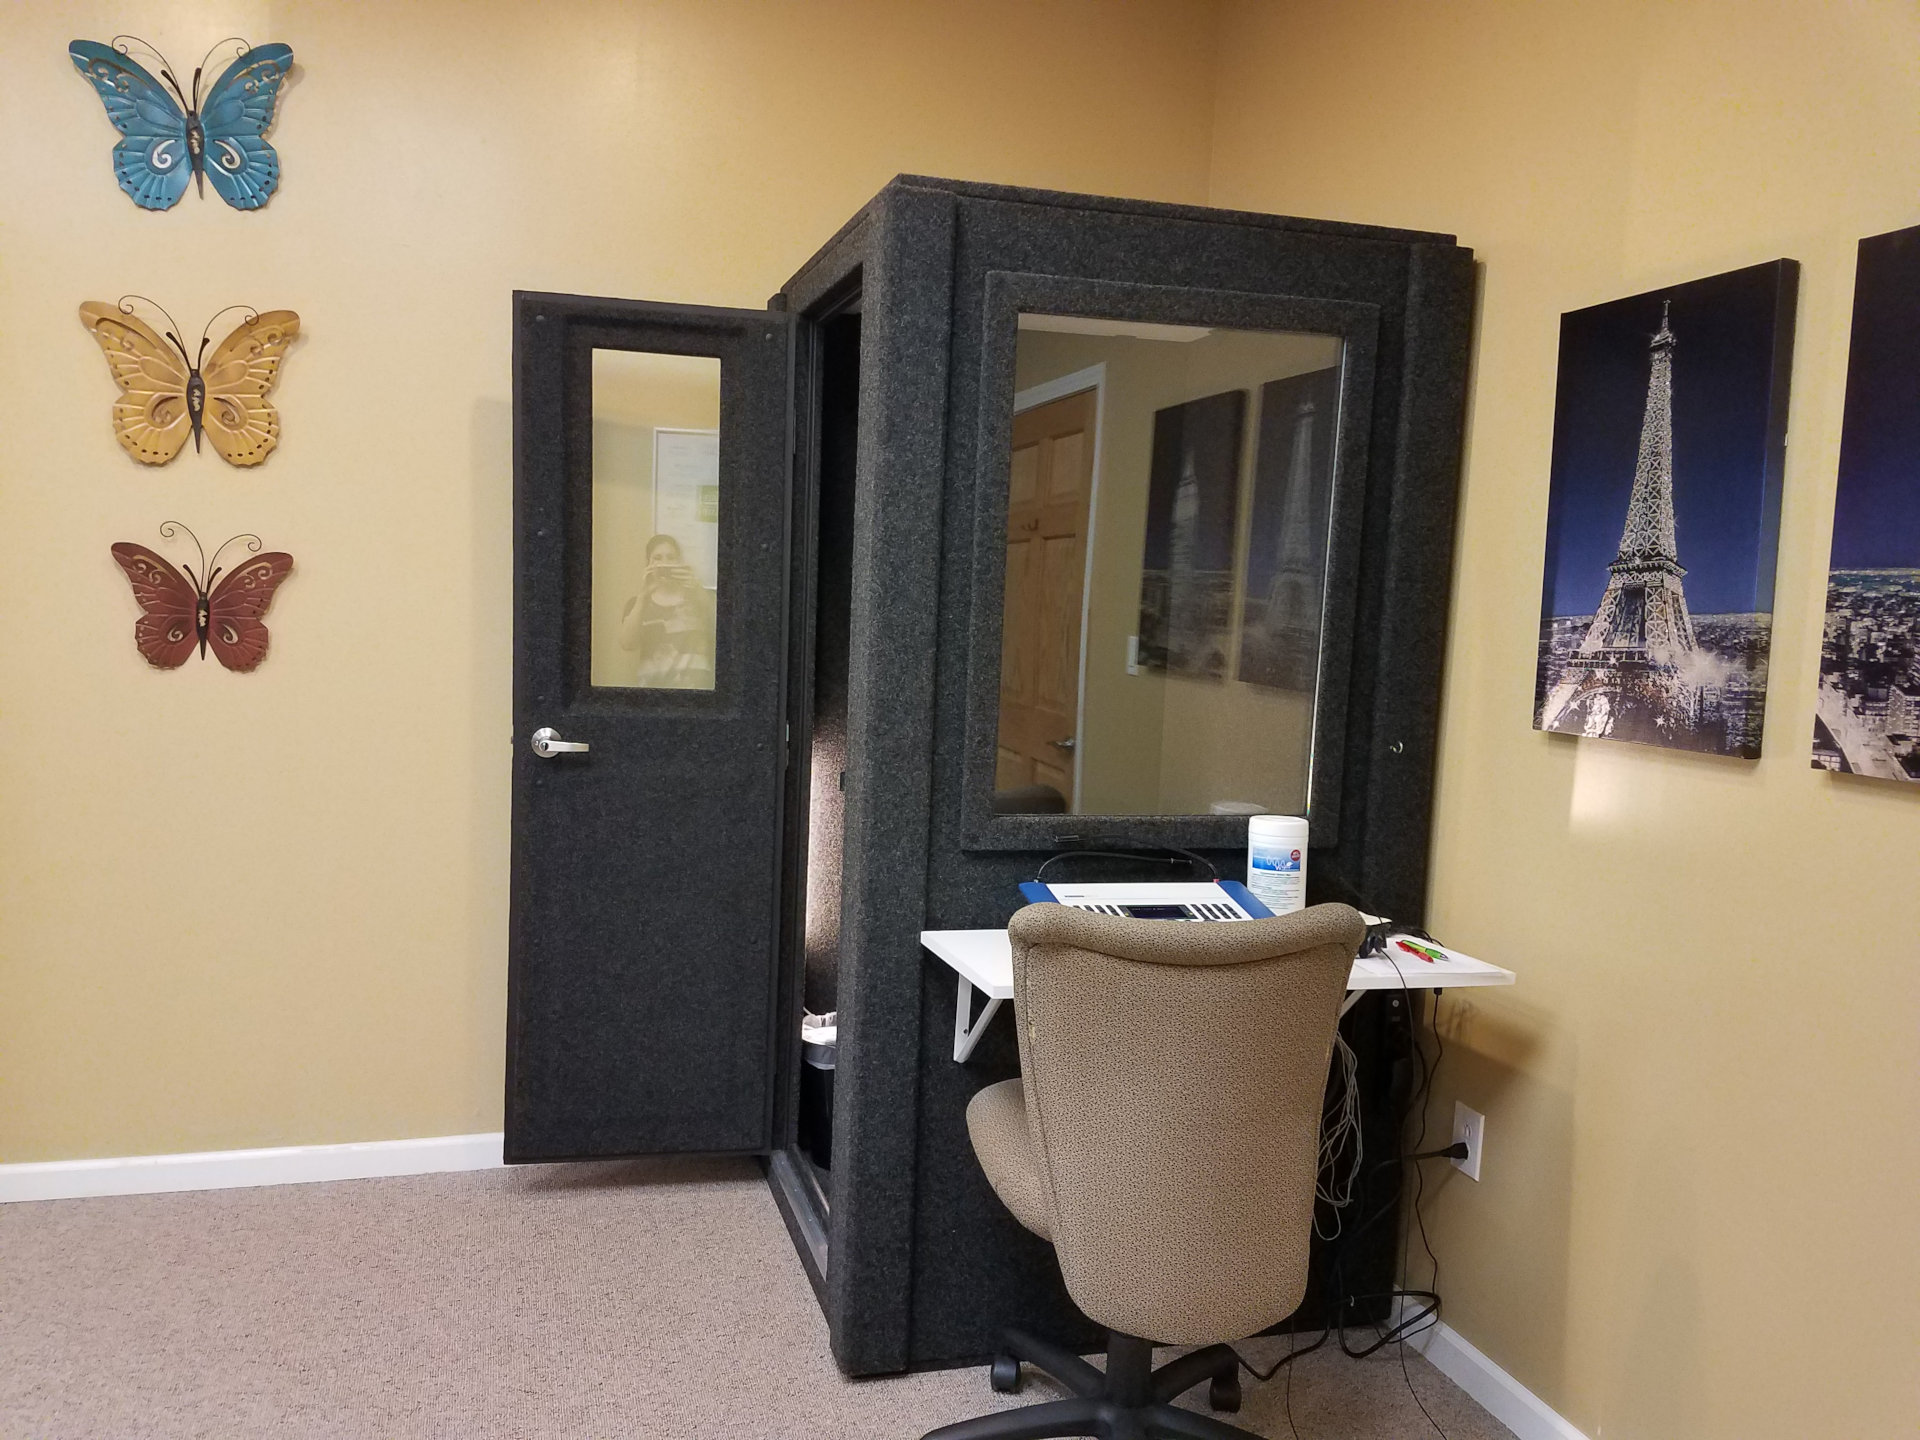 audio booth in corner with testing equipment and decorative images on walls